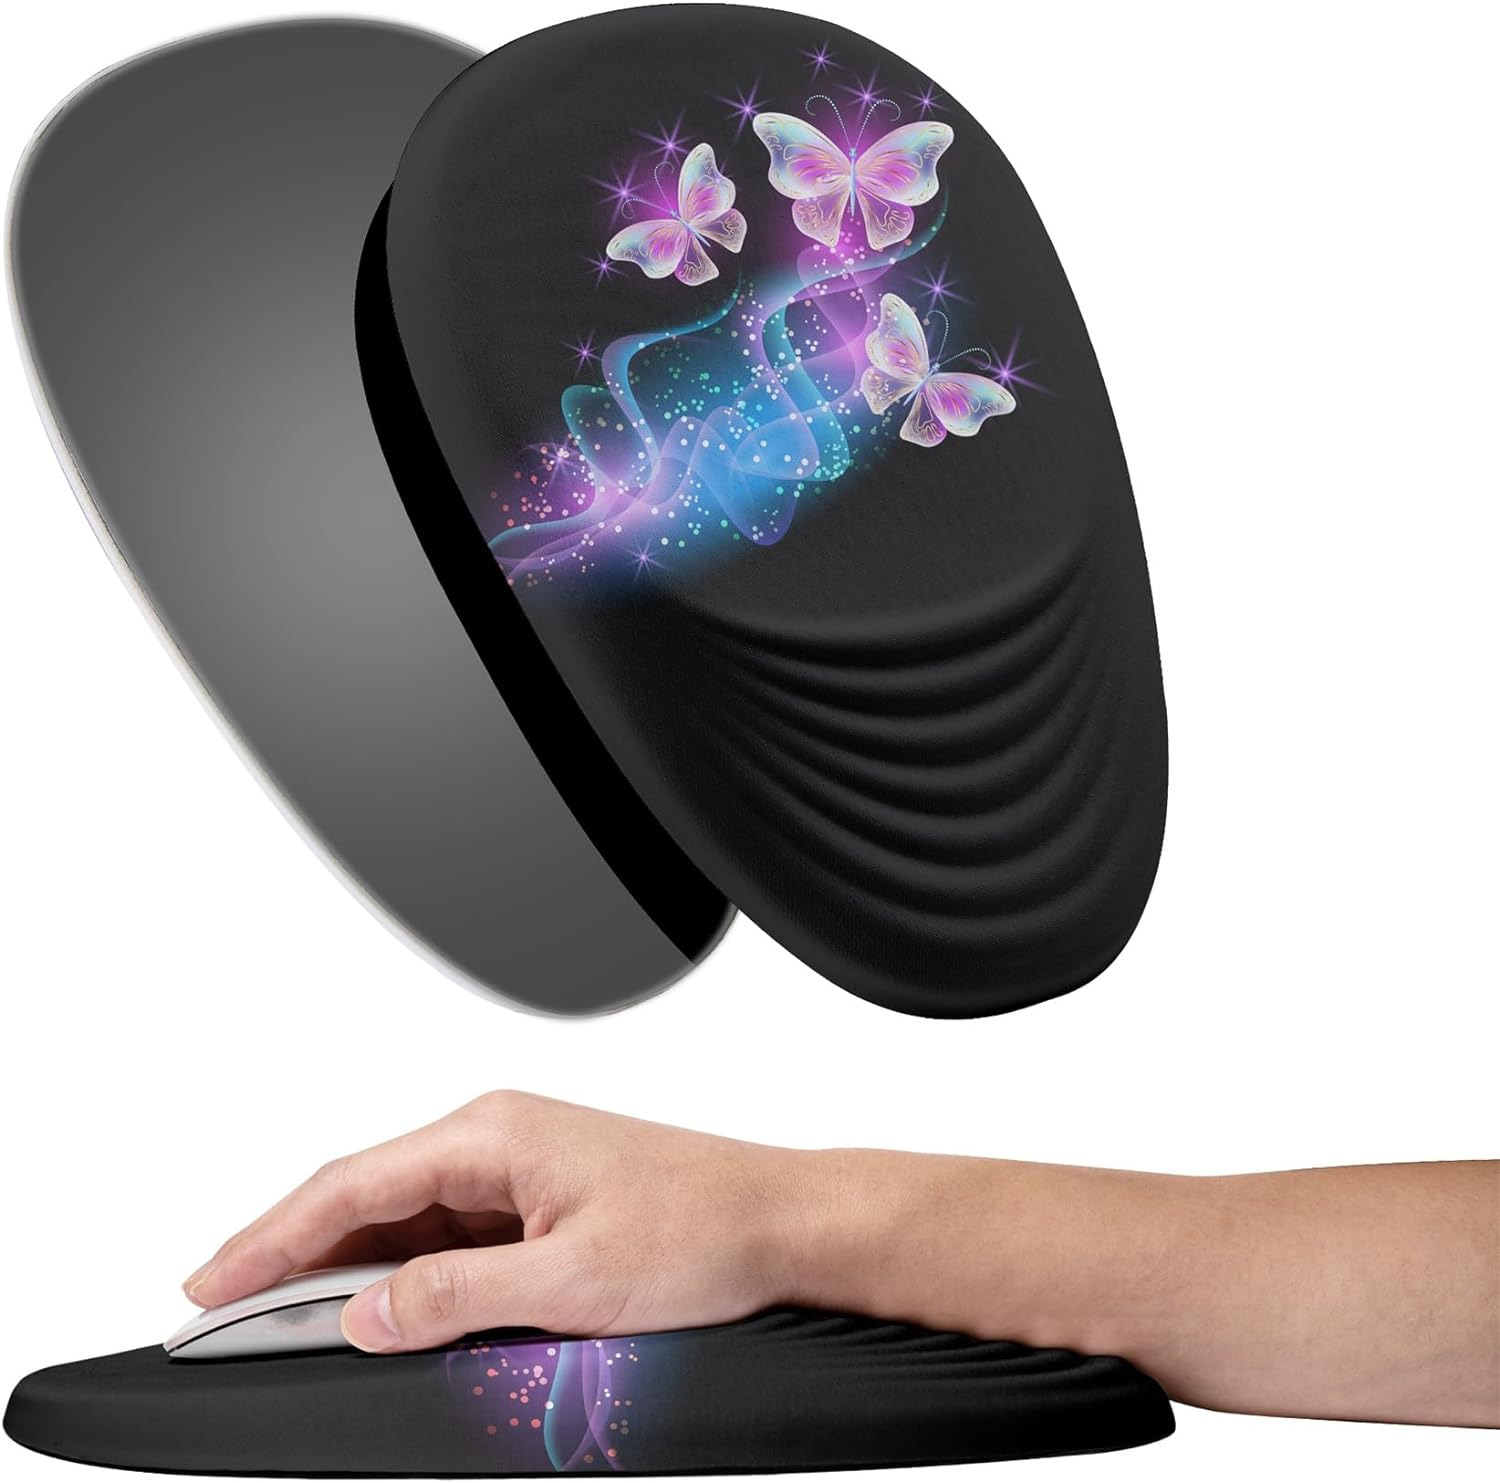 Mouse Pad, Ergonomic Mouse Pad with Memory Foam Wrist Rest Support and Lycra Clo